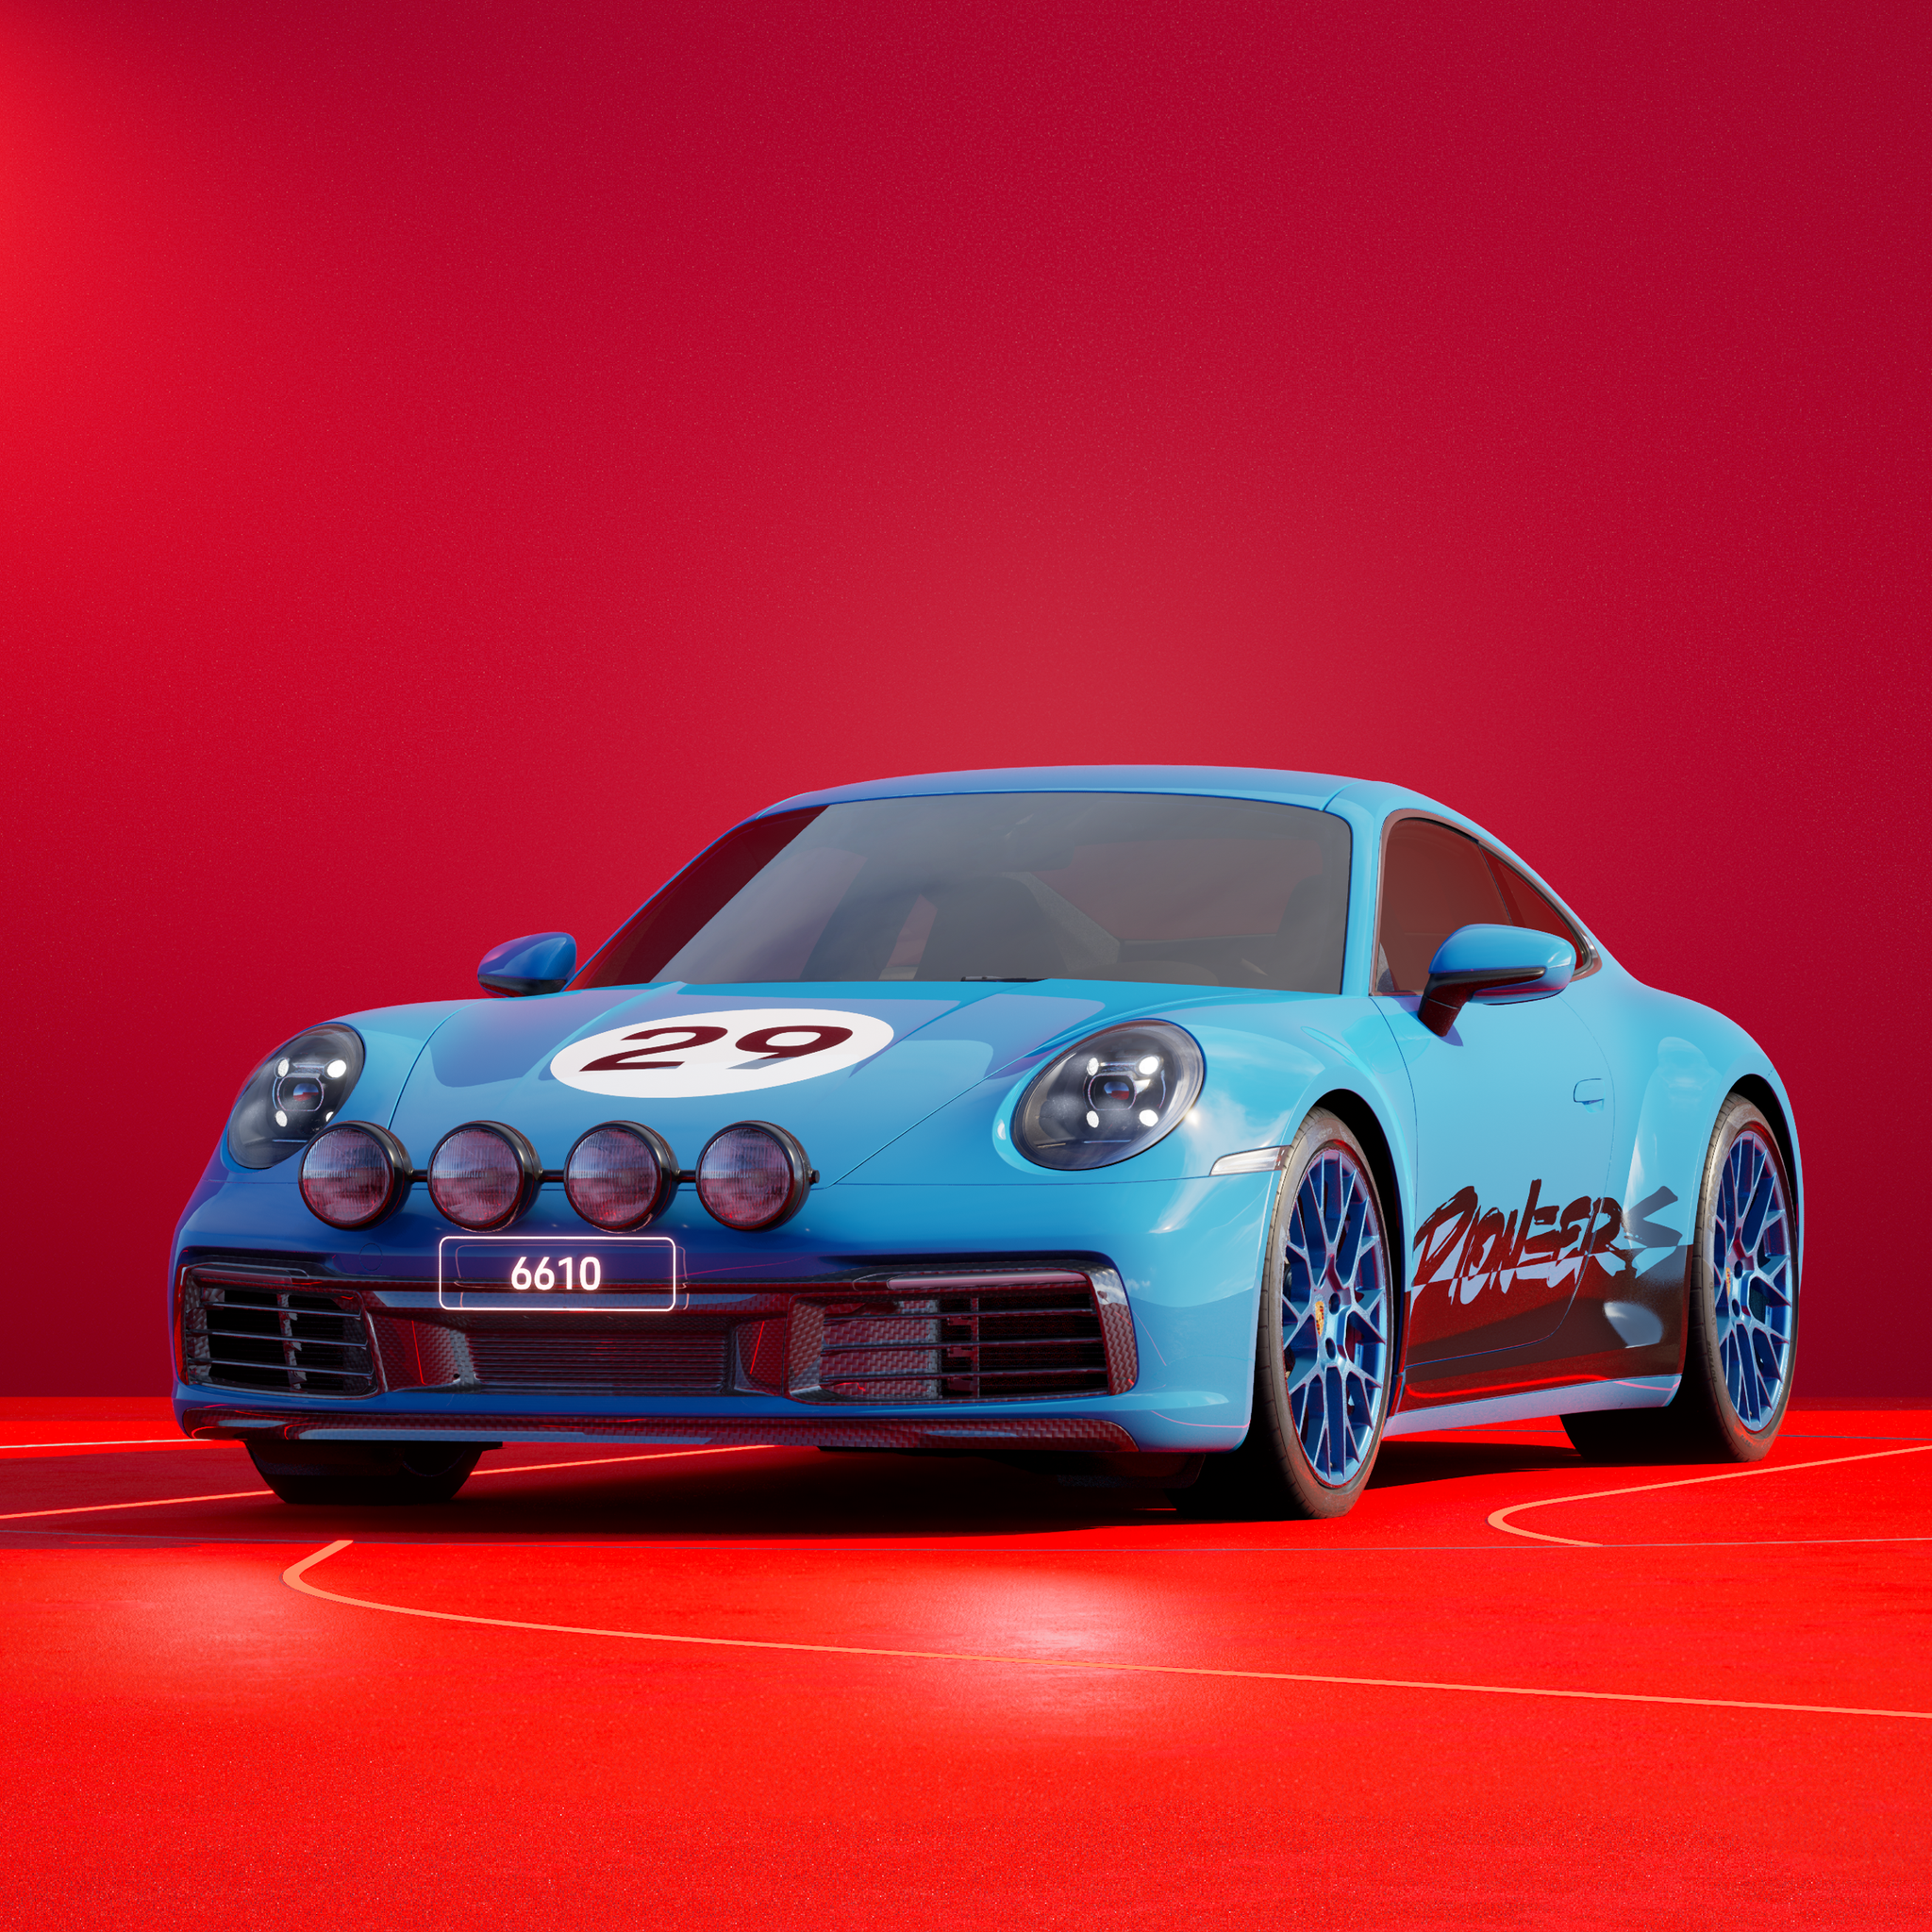 The PORSCHΞ 911 6610 image in phase